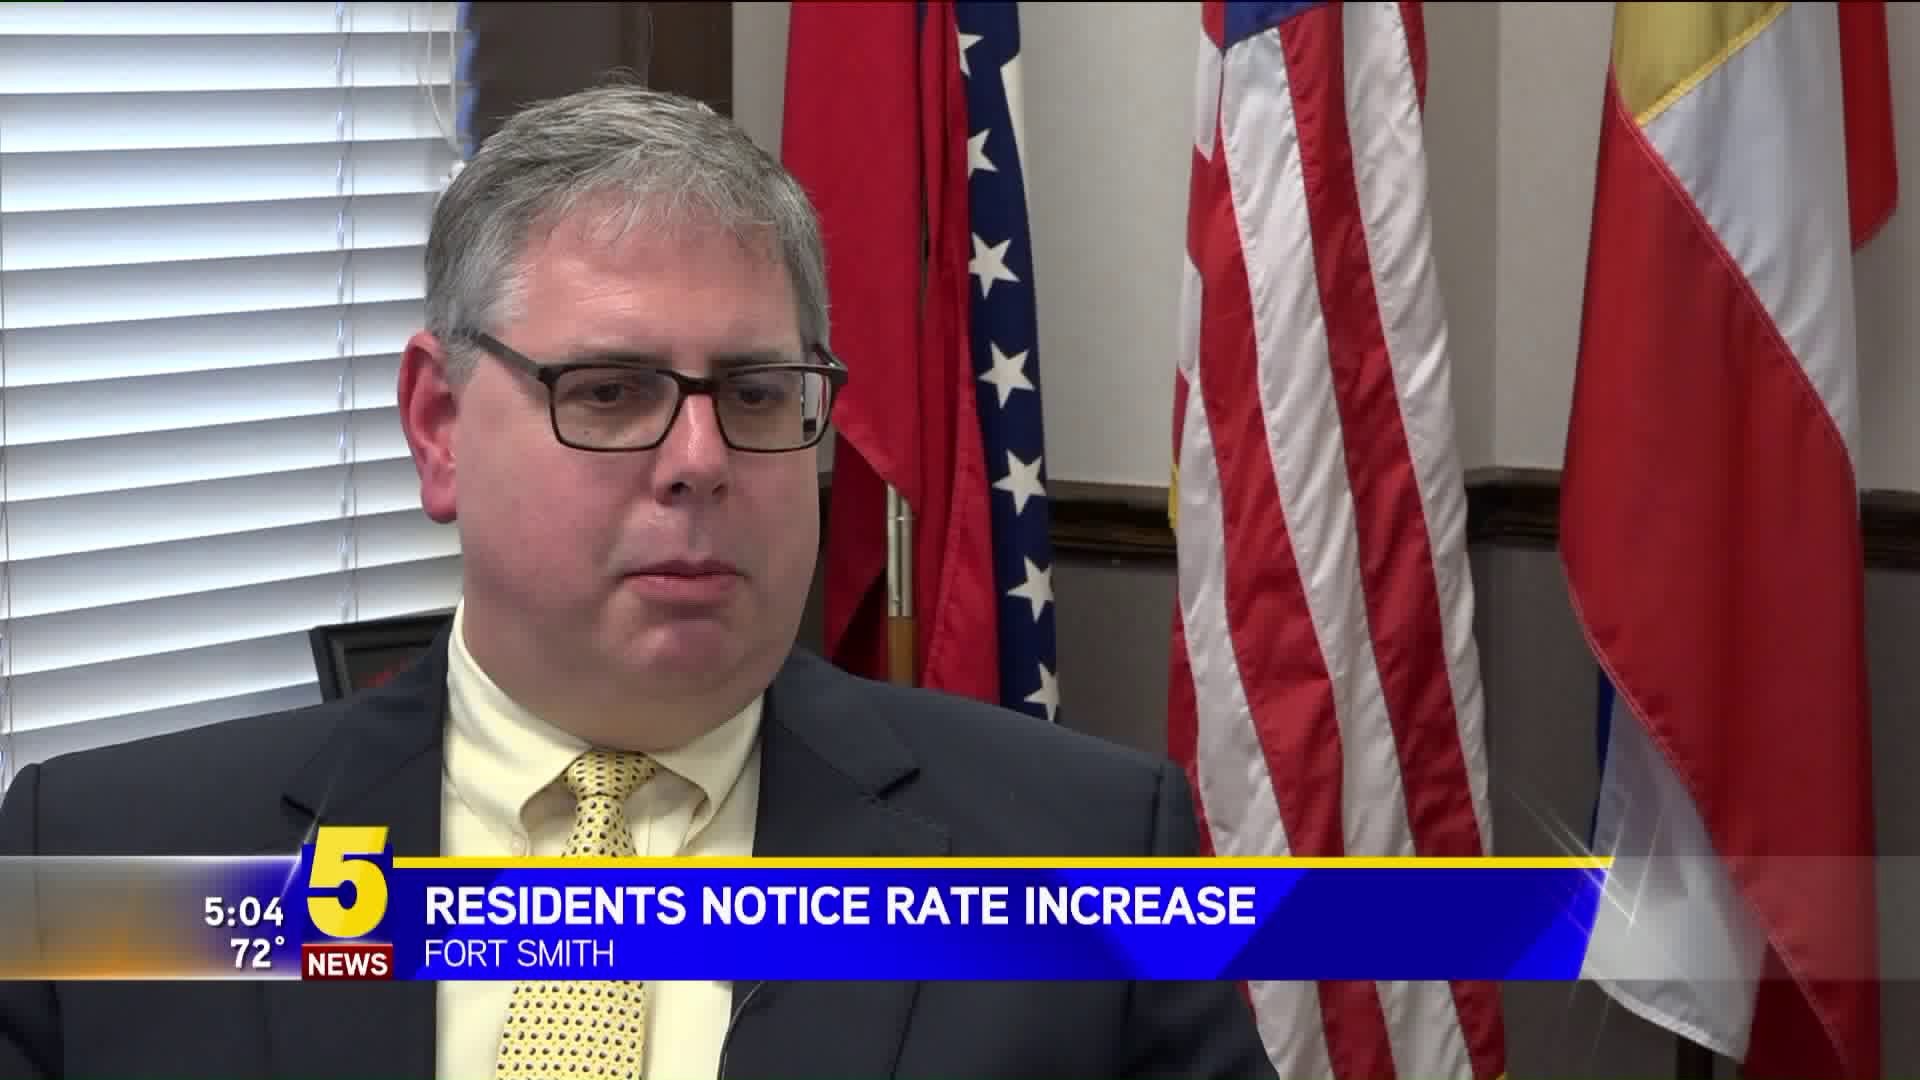 Residents Notice Rate Increase